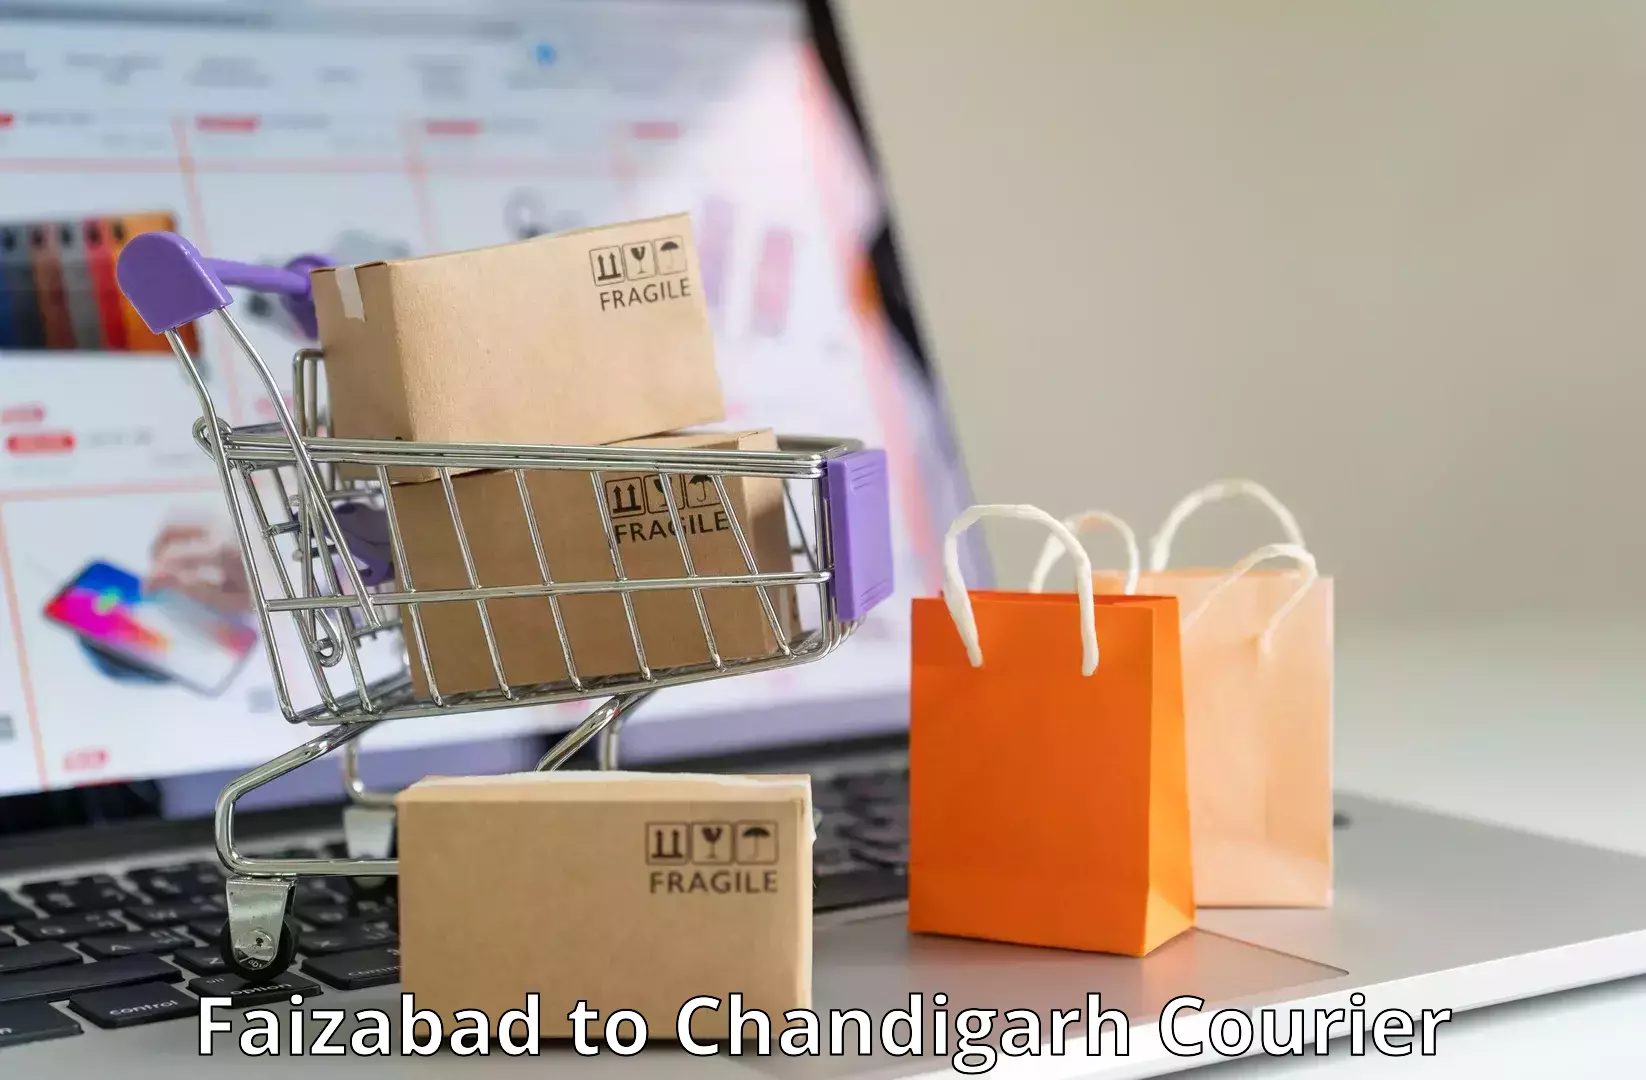 Express delivery capabilities Faizabad to Chandigarh